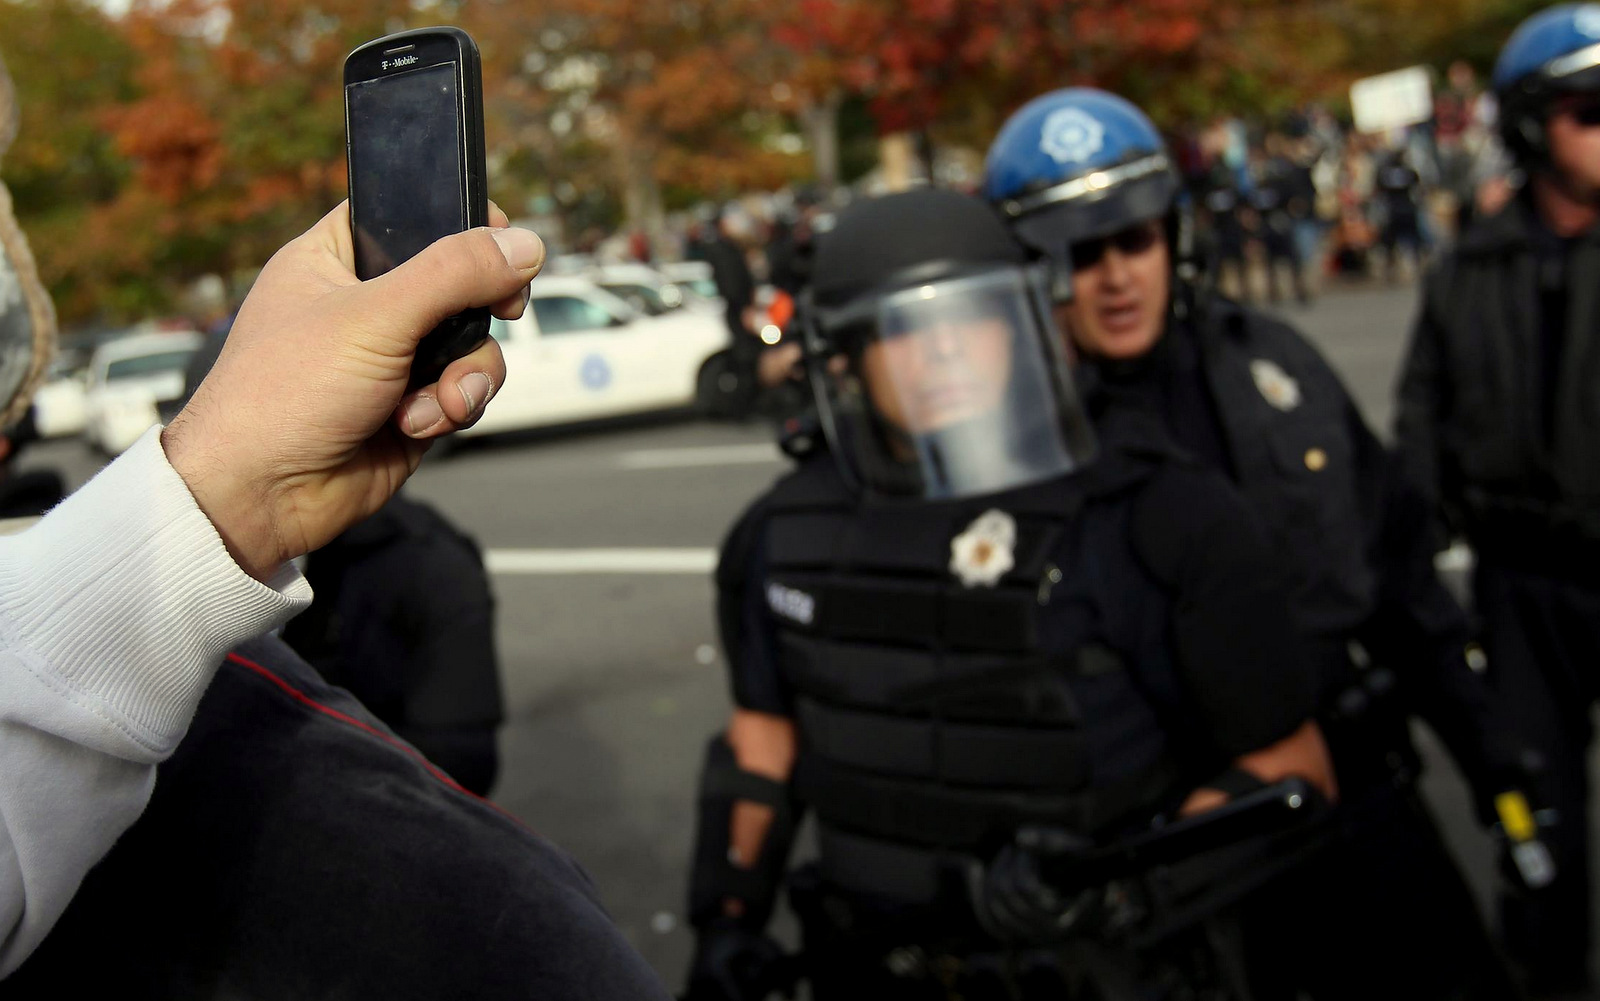 Apple patented a technology to prevent phones from filming at live music events, but privacy advocates say police could use it against activists.